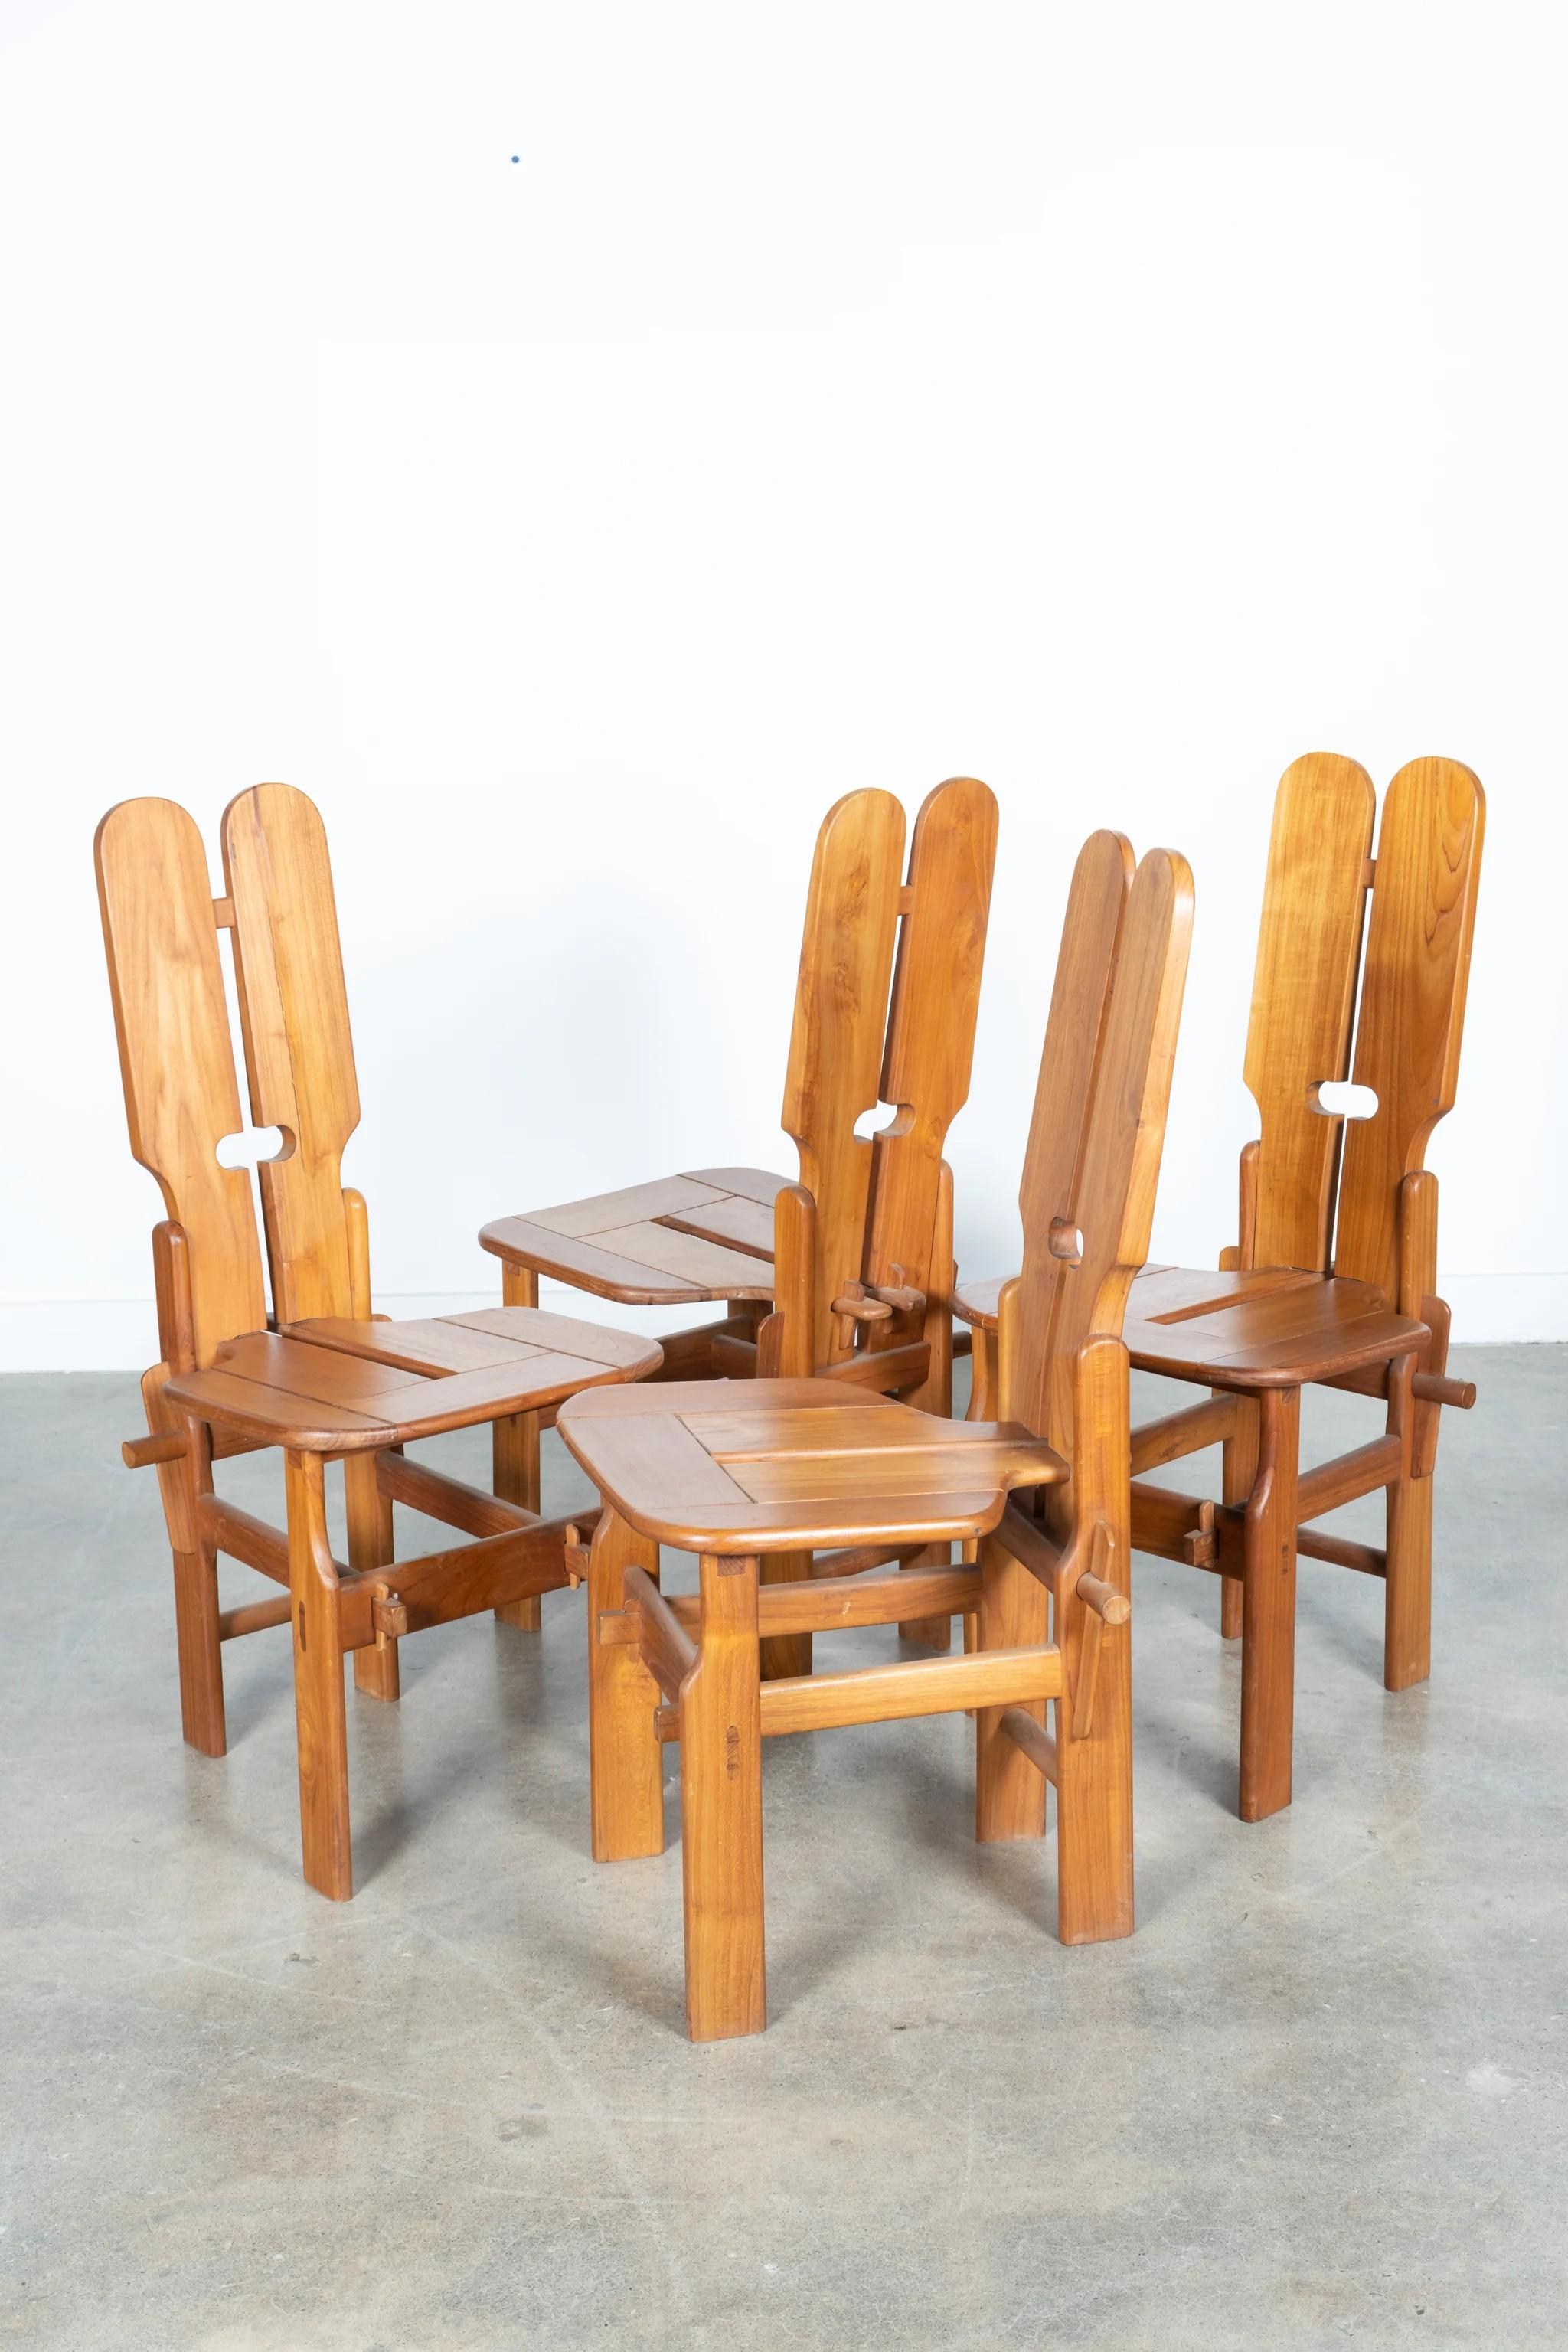 Italian Midcentury Architectural Chairs - Set of 4 For Sale 5